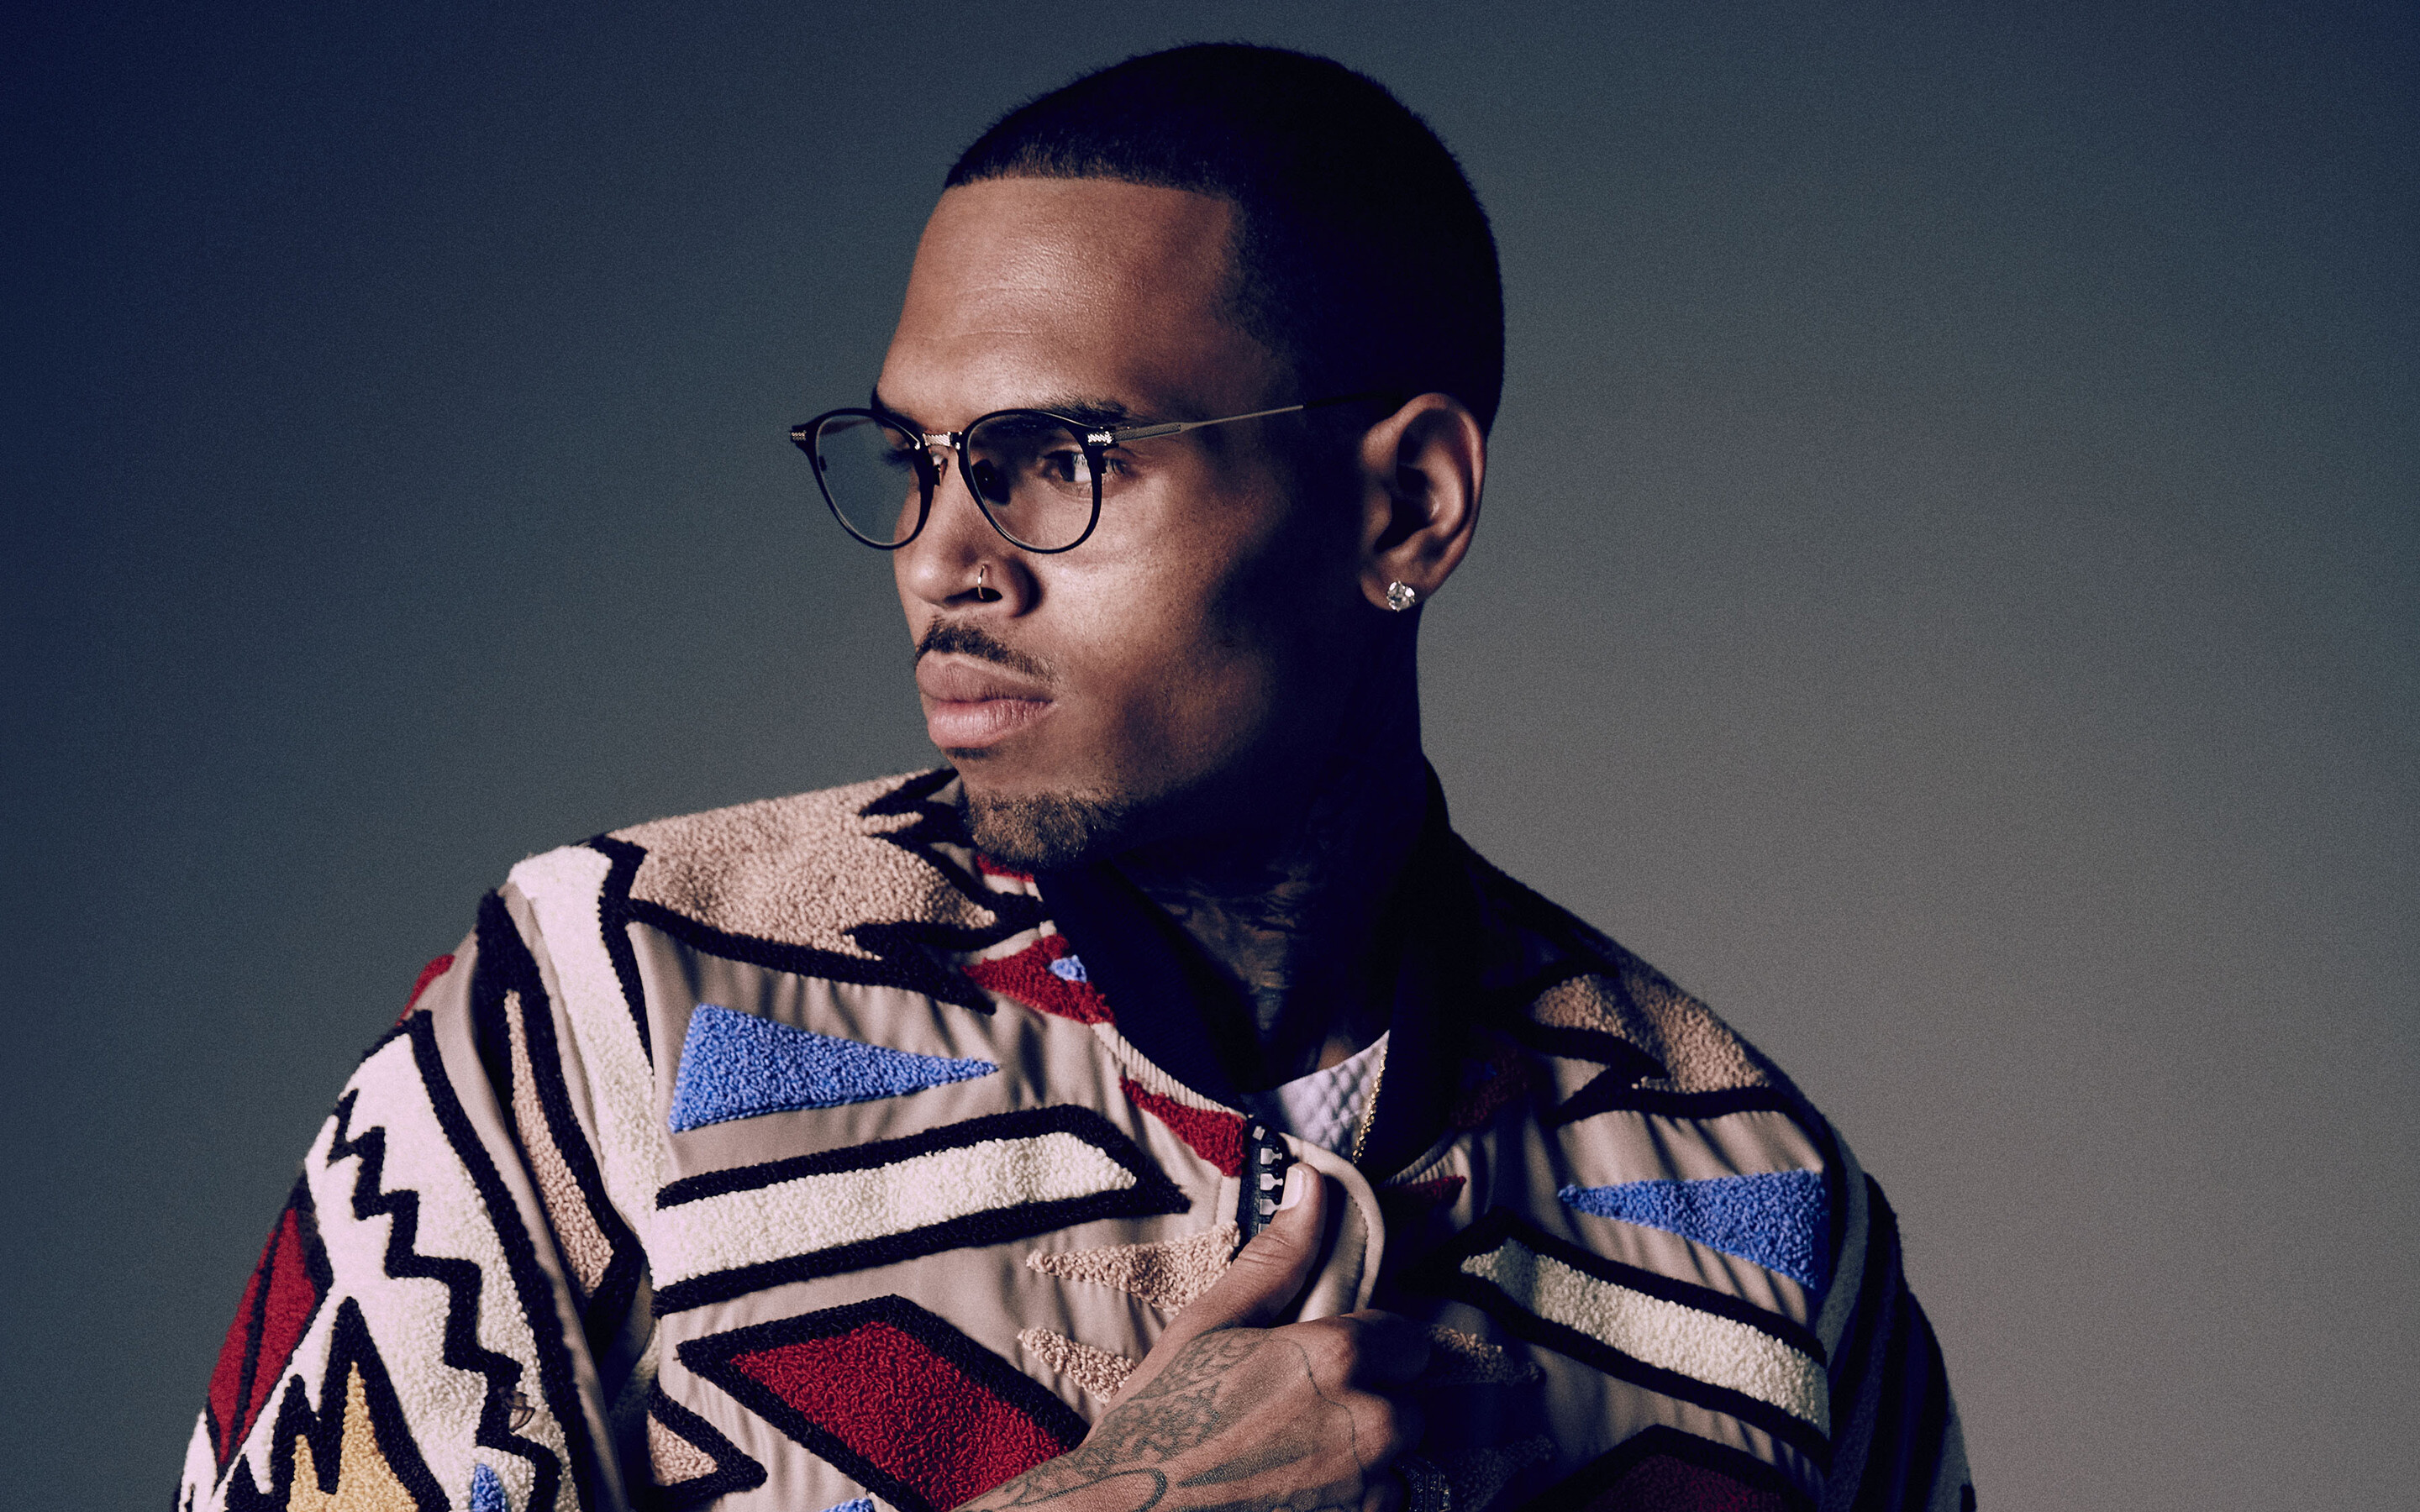 Chris Brown: US number one hit, "Kiss Kiss", produced by T-Pain. 2880x1800 HD Background.